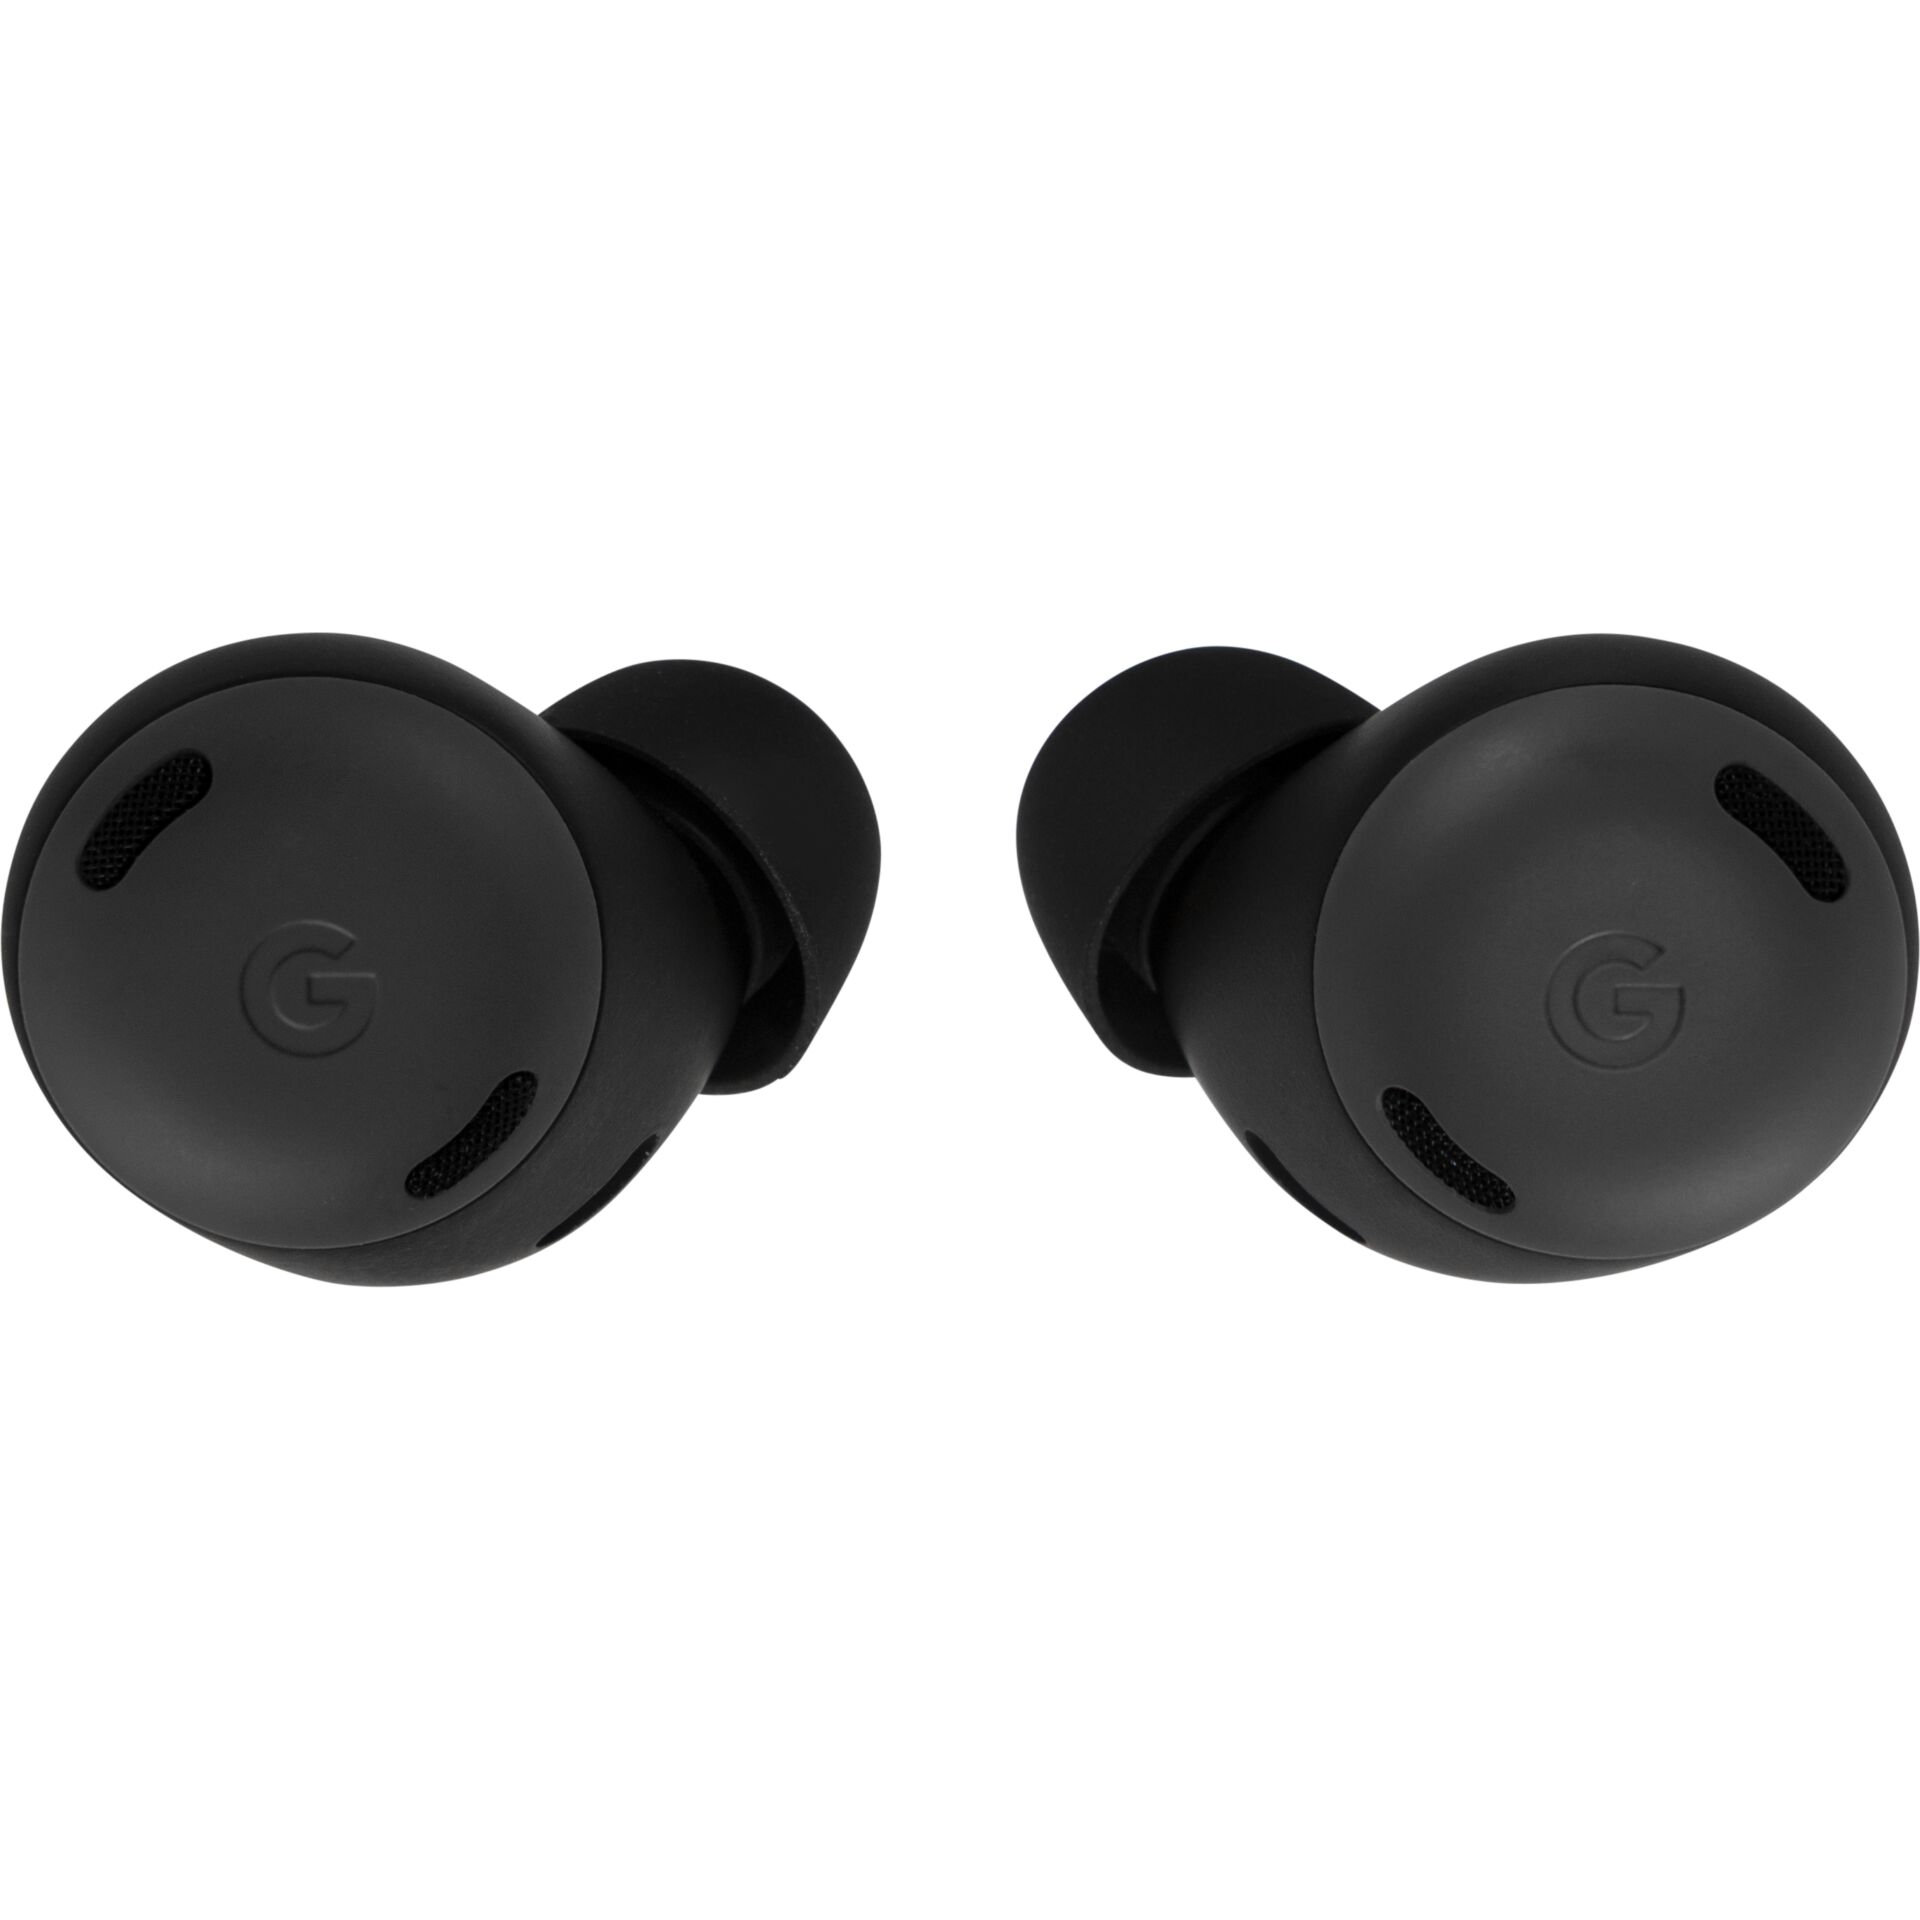 Google Pixel Buds Pro Charcoal, Ohrhörer (In-Ear), Bluetooth 5.0, AAC, Google Fast Pair, Multipoint